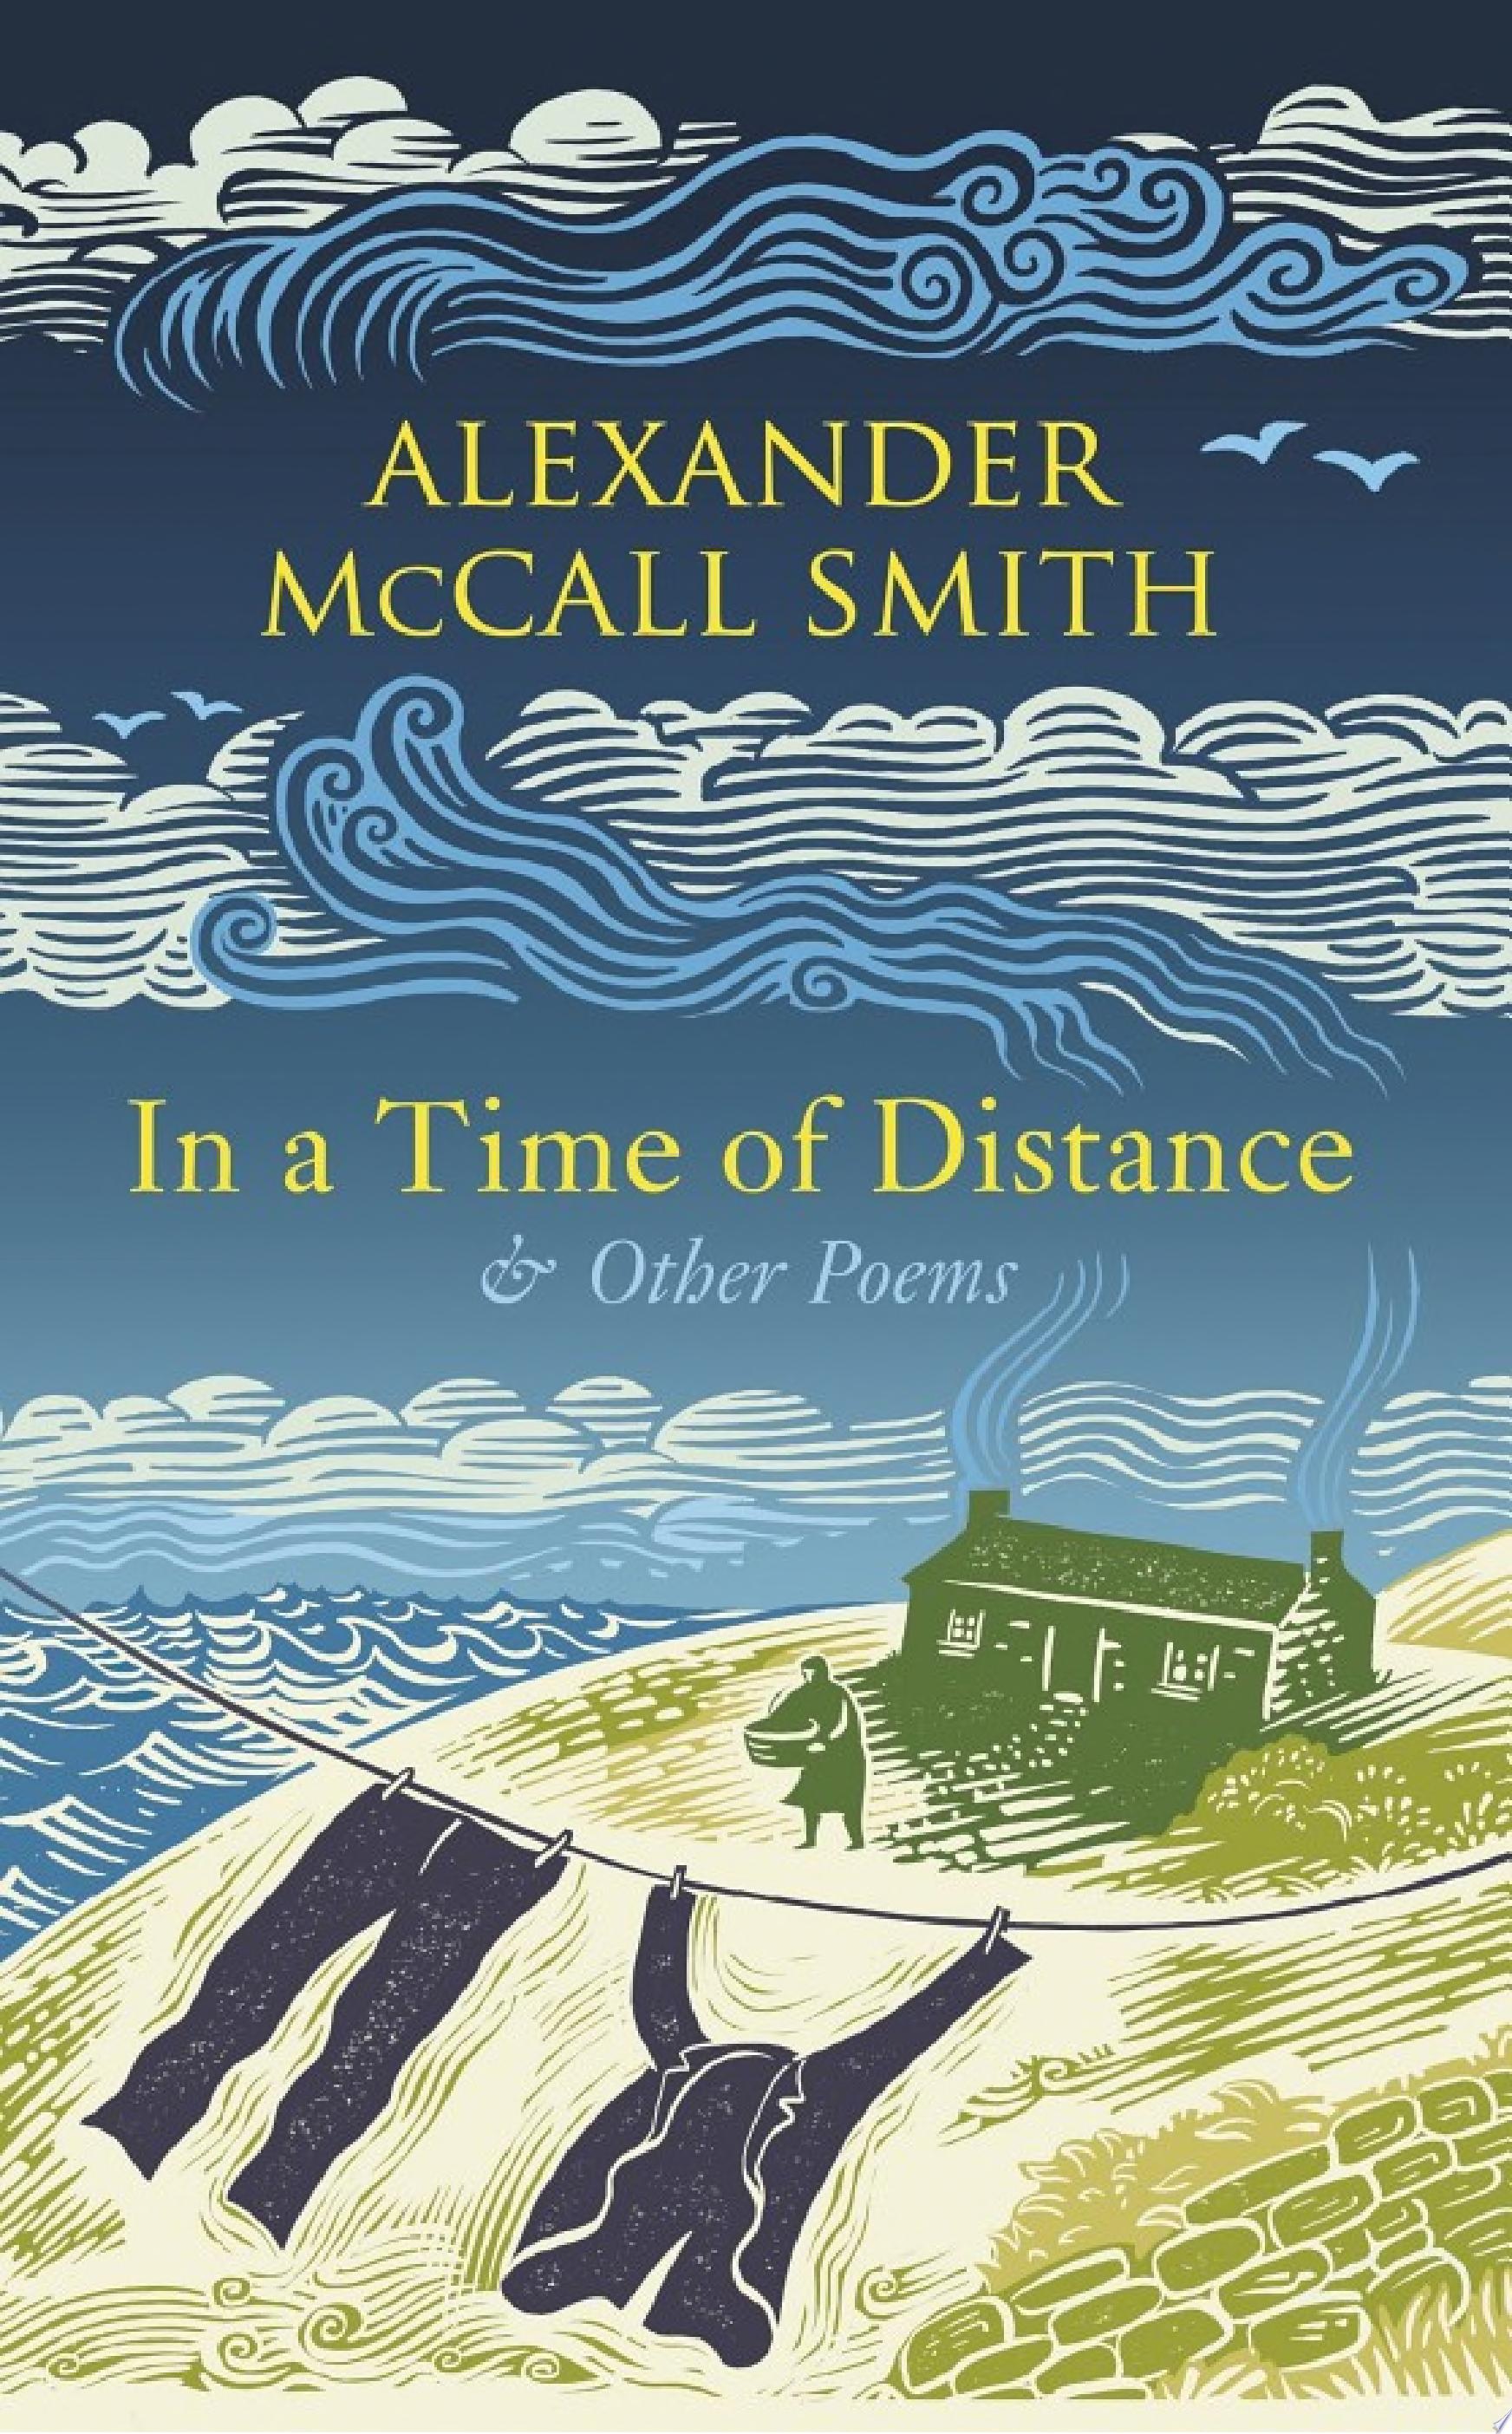 Image for "In a Time of Distance"